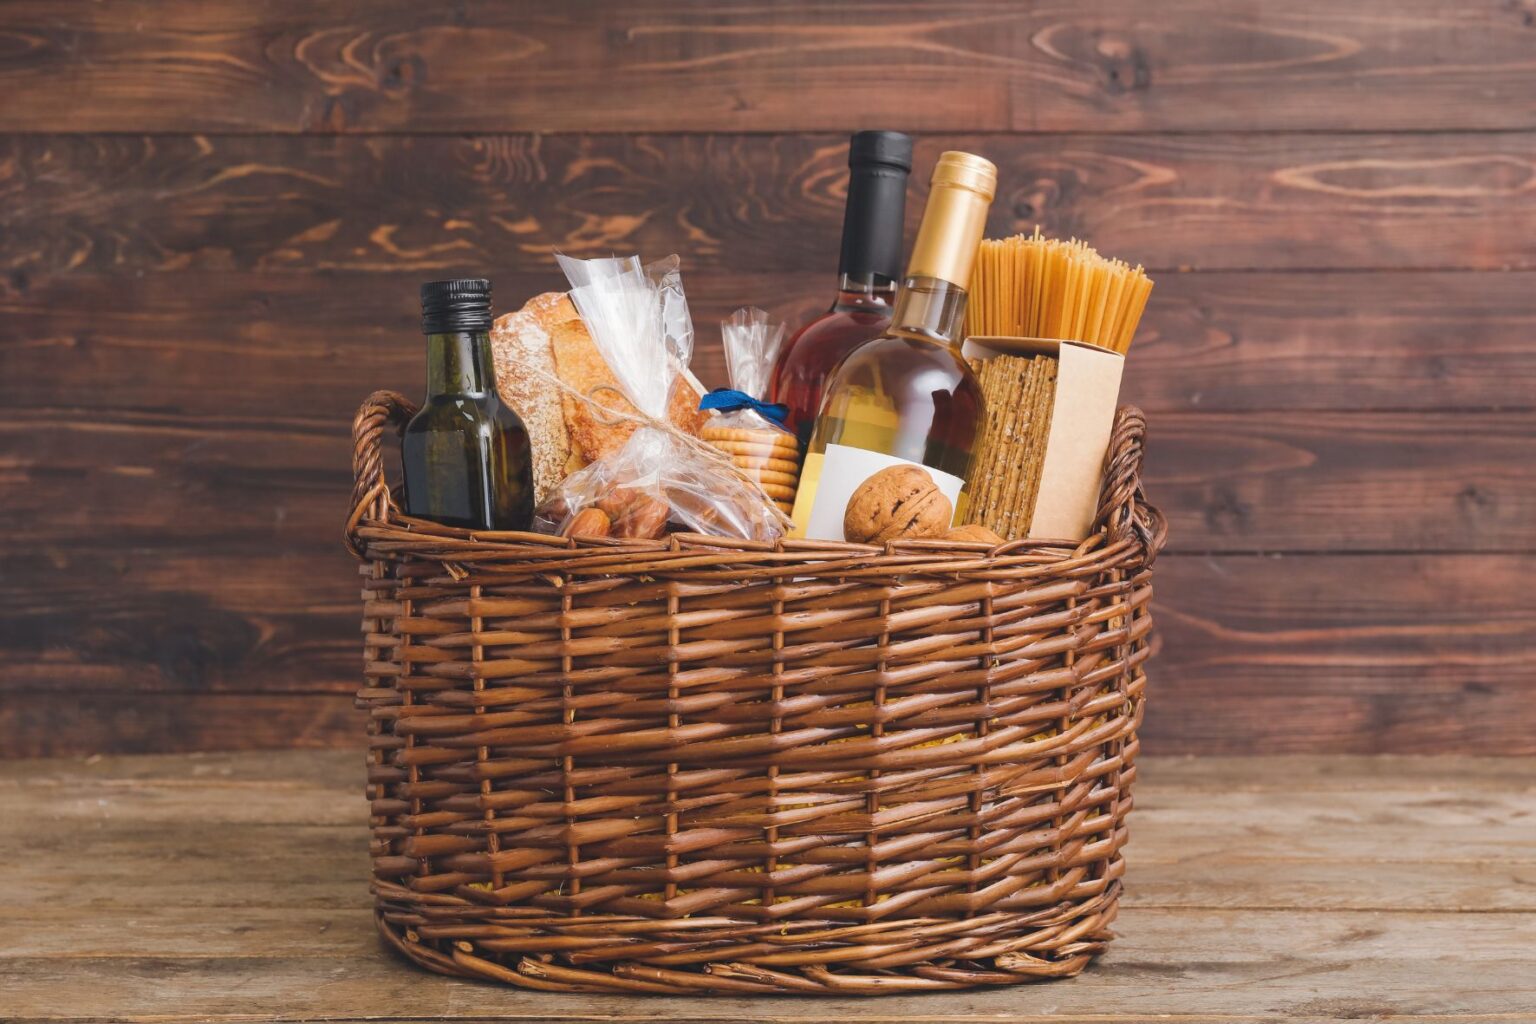 Housewarming Gift Basket Ideas for New Home Owners - Her Cottage Home